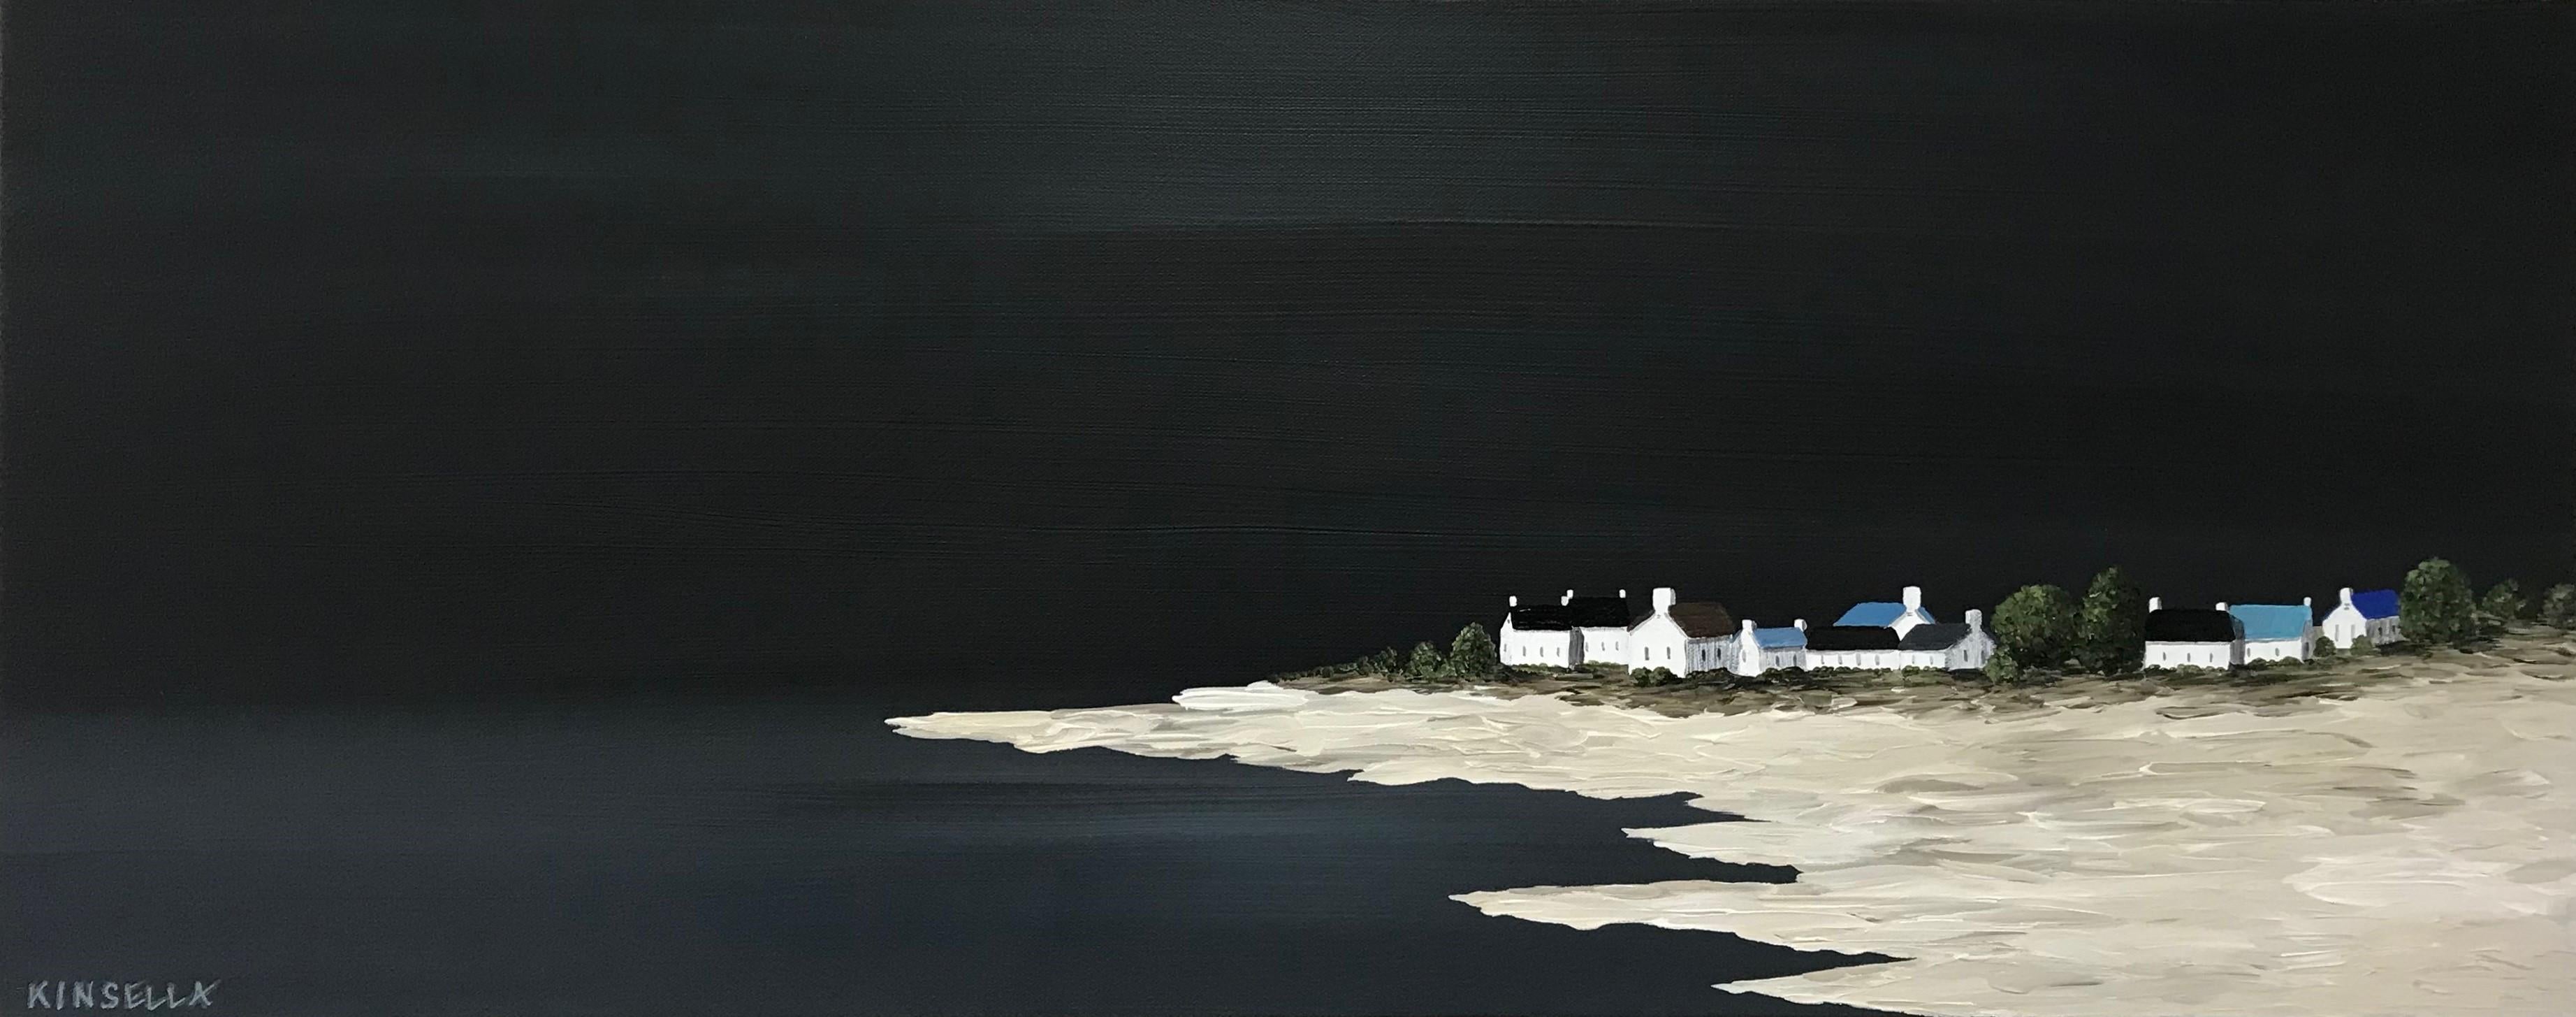 'By the Light of the Moon' is a medium size acrylic on gallery wrapped canvas seascape painting created by American artist Susan Kinsella in 2018.  Featuring a dark palette made of black and grey tones contrasting beautifully with the soft beige of